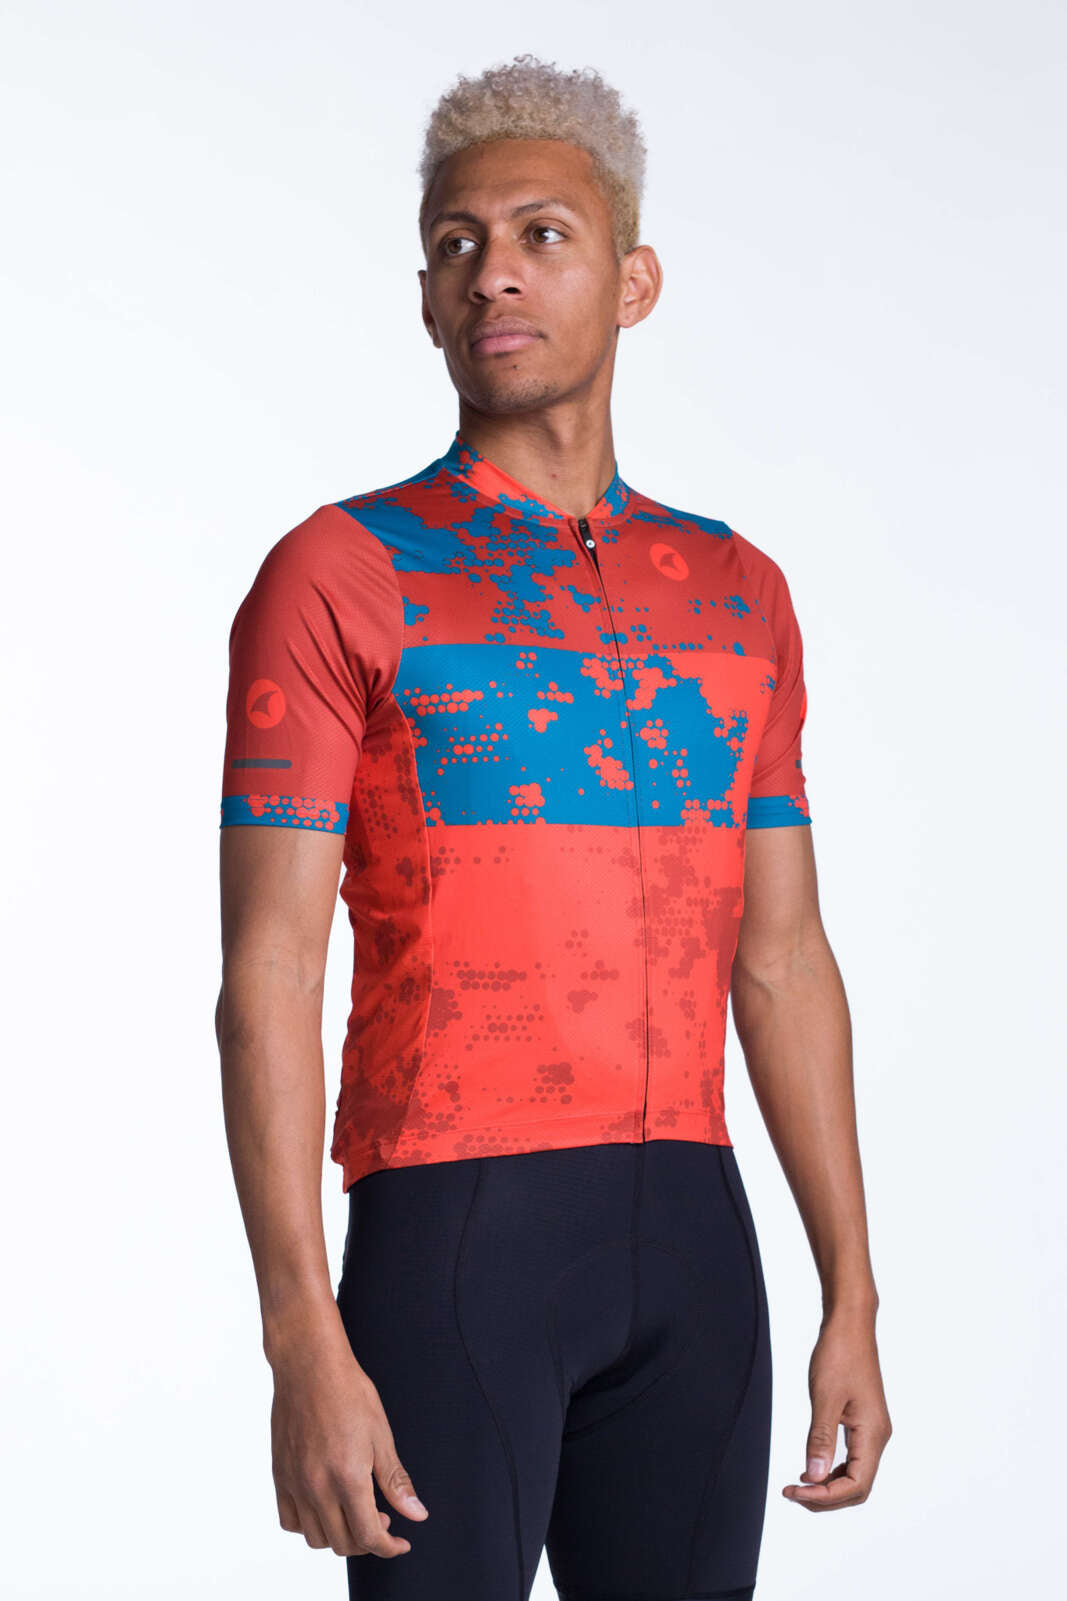 Men's Red Bike Jersey - Ascent Disperse Front View